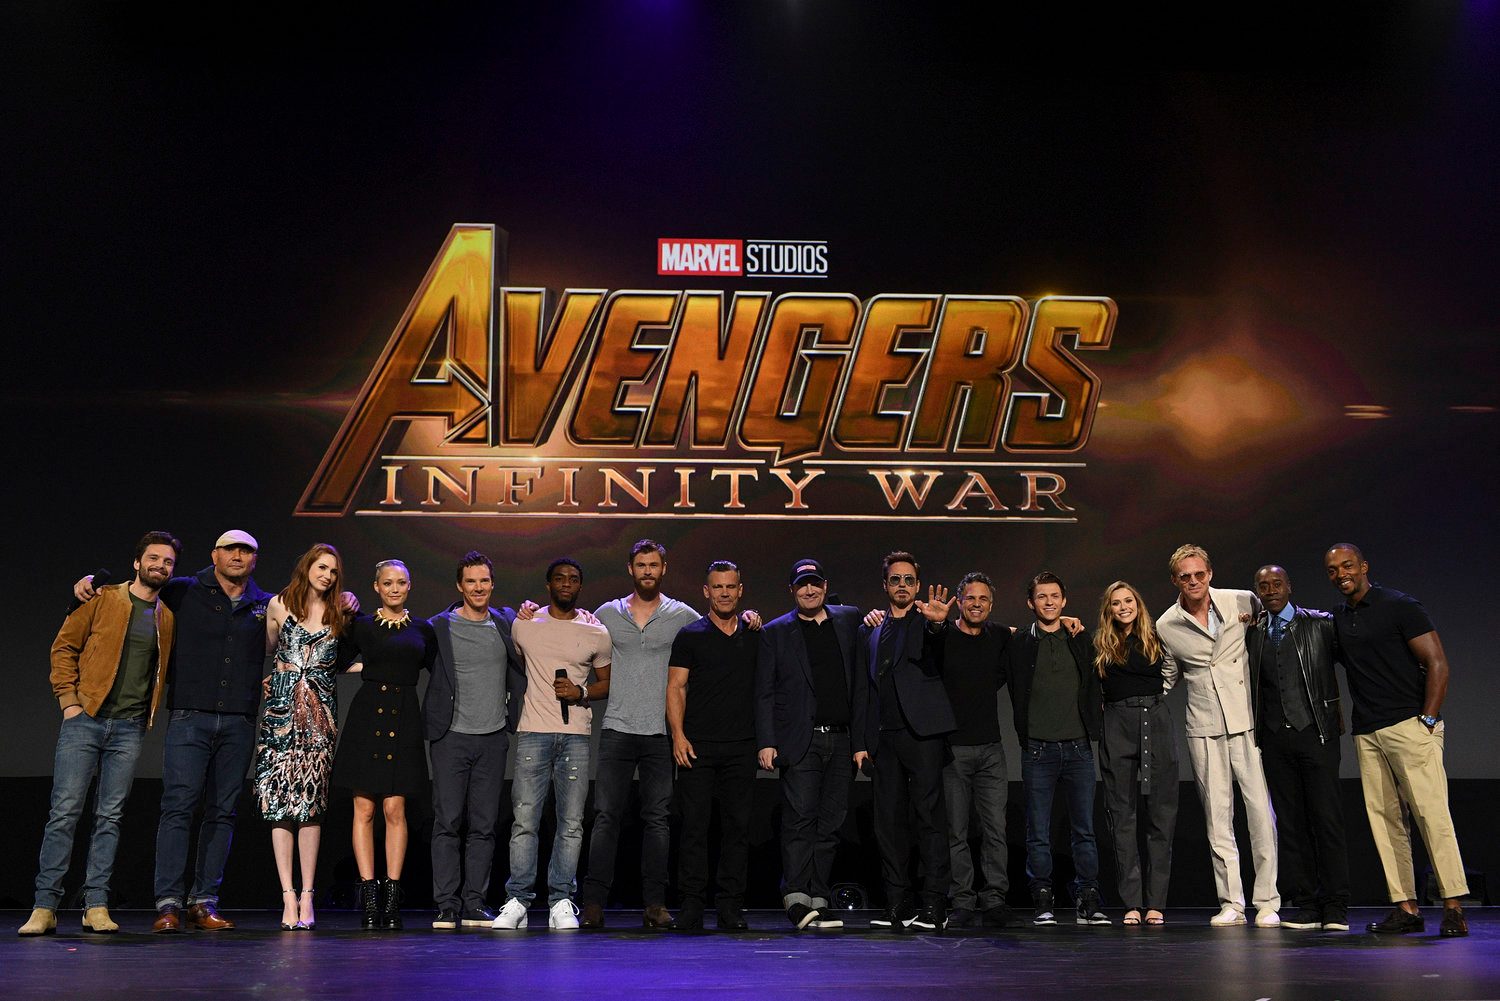 'INFINITY WAR.' The stars of 'Avengers: Infinity War' come together at D23 EXPO 2017. From left to right: Sebastian Stan, Dave Bautista, Karen Gillan, Pom Klementieff, Benedict Cumberbatch, Chadwick Boseman, Chris Hemsworth, Josh Brolin, Marvel Studios President Kevin Feige, Robert Downey Jr, Mark Ruffalo, Tom Holland, Elizabeth Olsen, Paul Bettany, Don Cheadle, and Anthony Mackie. Photo by Disney/Image Group LA 